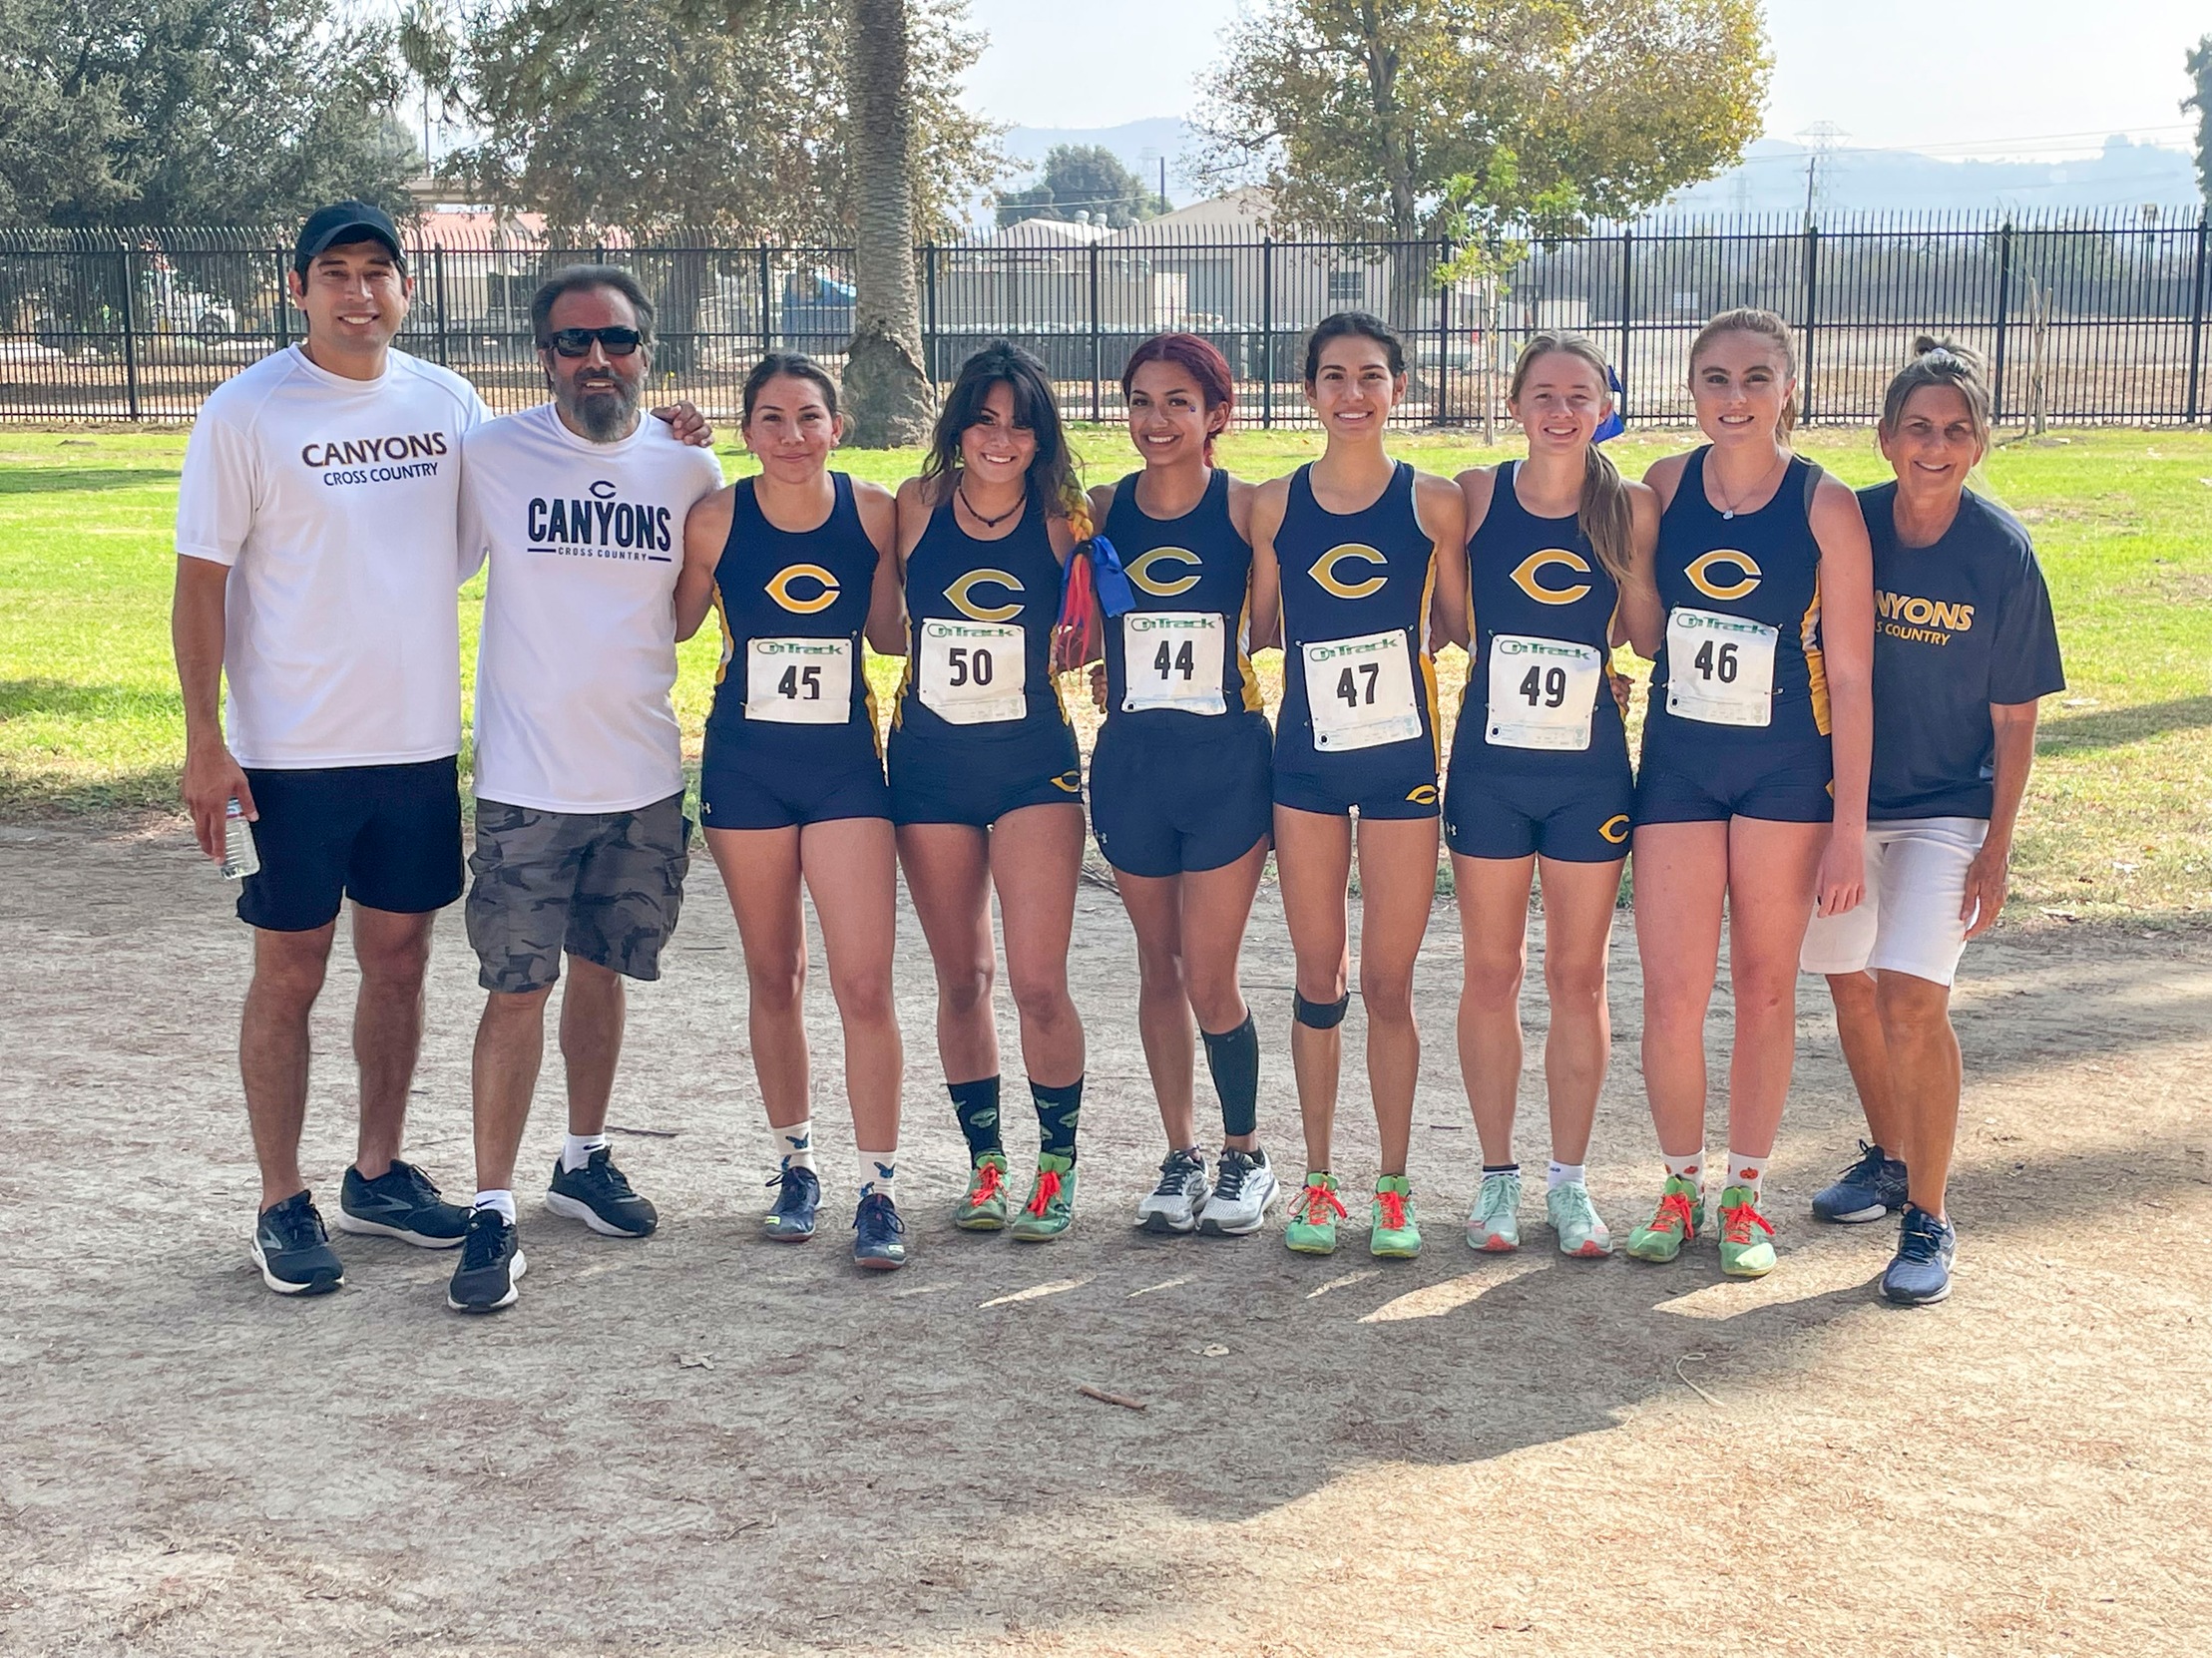 College of the Canyons finished third at the Western State Conference (WSC) Championship meet on Friday at the Legg Lake Recreation Area in South El Monte. All six runners posted season-best times, including freshman Danielle Salcedo who won the event to take home the individual conference crown. —Jesse Muñoz/COC Sports Information Director 